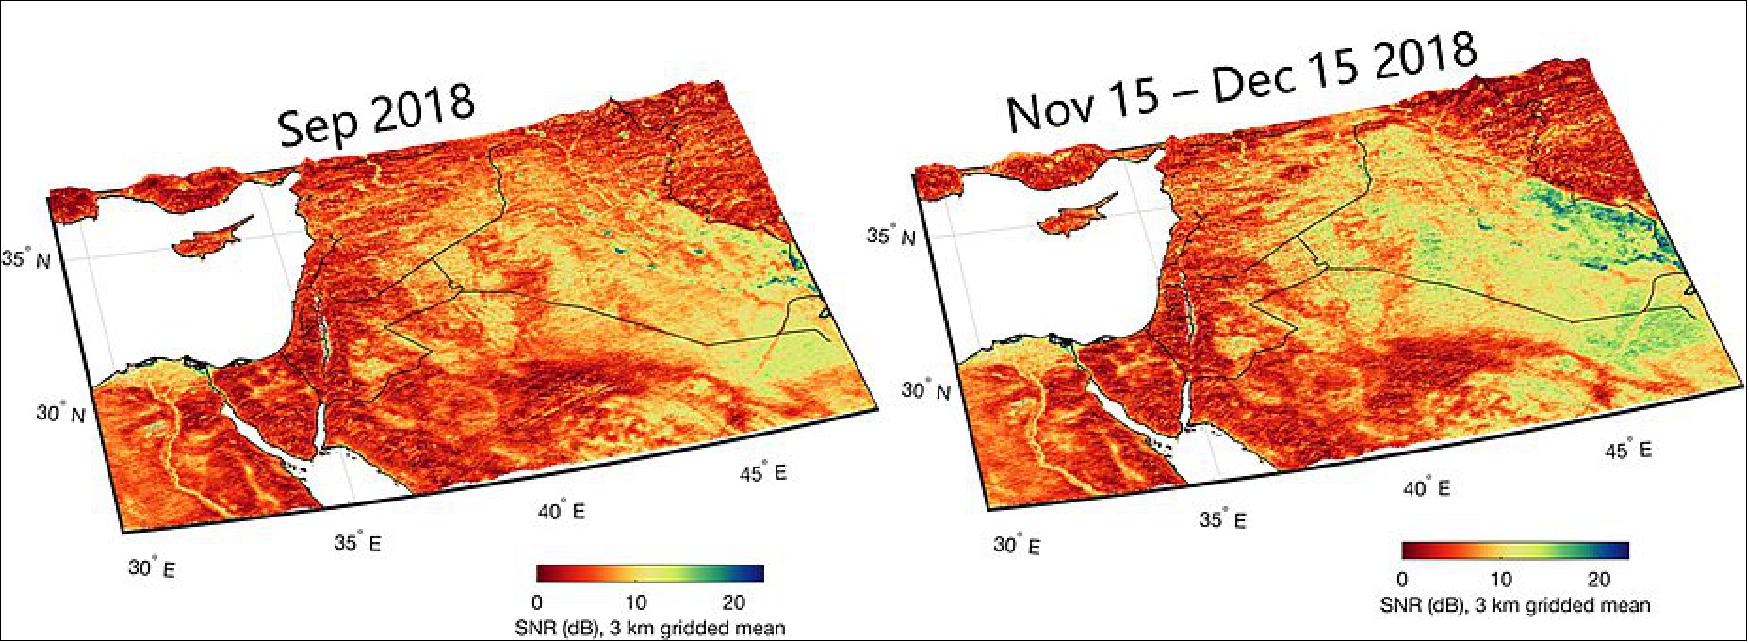 Figure 22: An extreme precipitation event occurred in northwestern Iraq on 22-23 Nov 2018, causing major flooding in Ninewa and Salah al-Din governorates. The September 2018 CYGNSS SNR map (left) before the flooding provides a baseline. The Nov-Dec 2018 SNR map (right) identifies flooded regions by large increases in SNR, highlighted as the yellow/green areas (image credit C. Chew, UCAR)